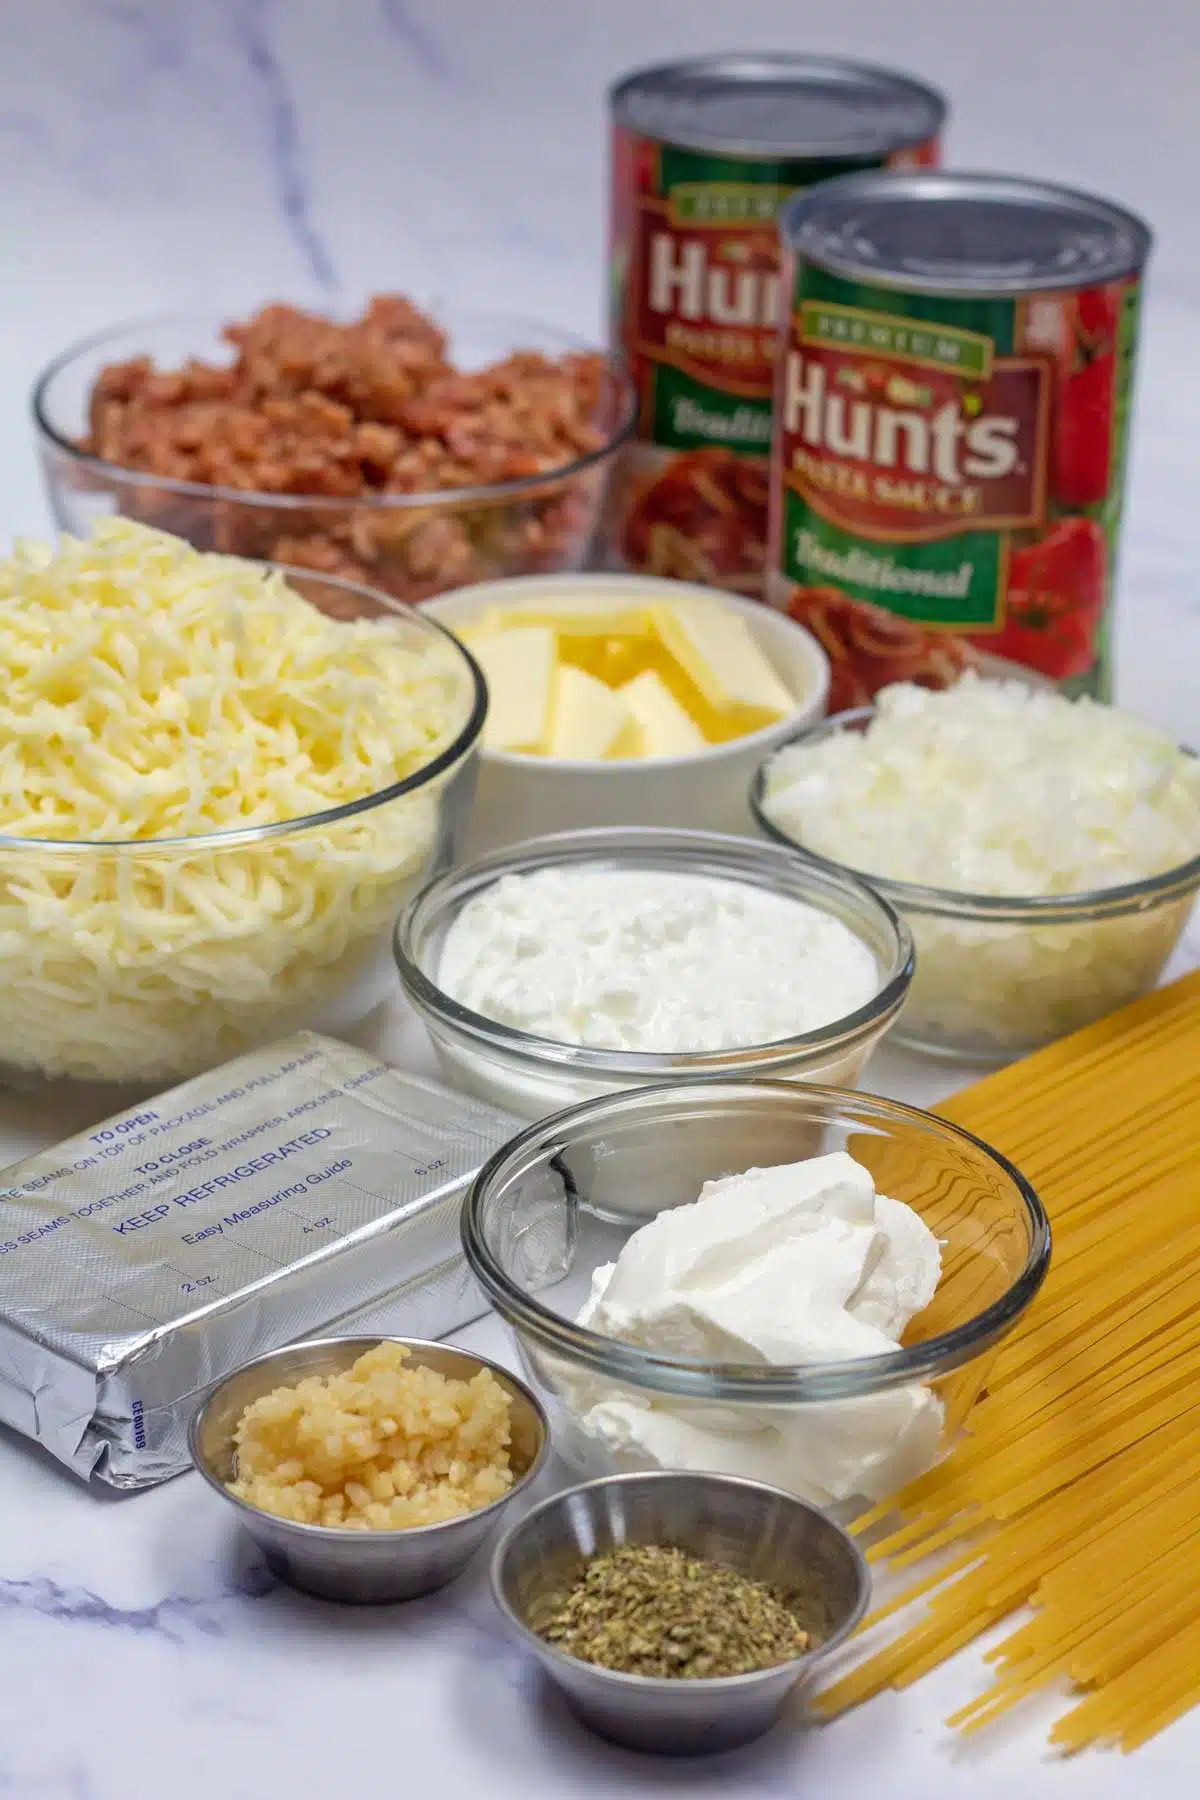 Tall image showing ingredients needed for Million dollar spaghetti casserole.